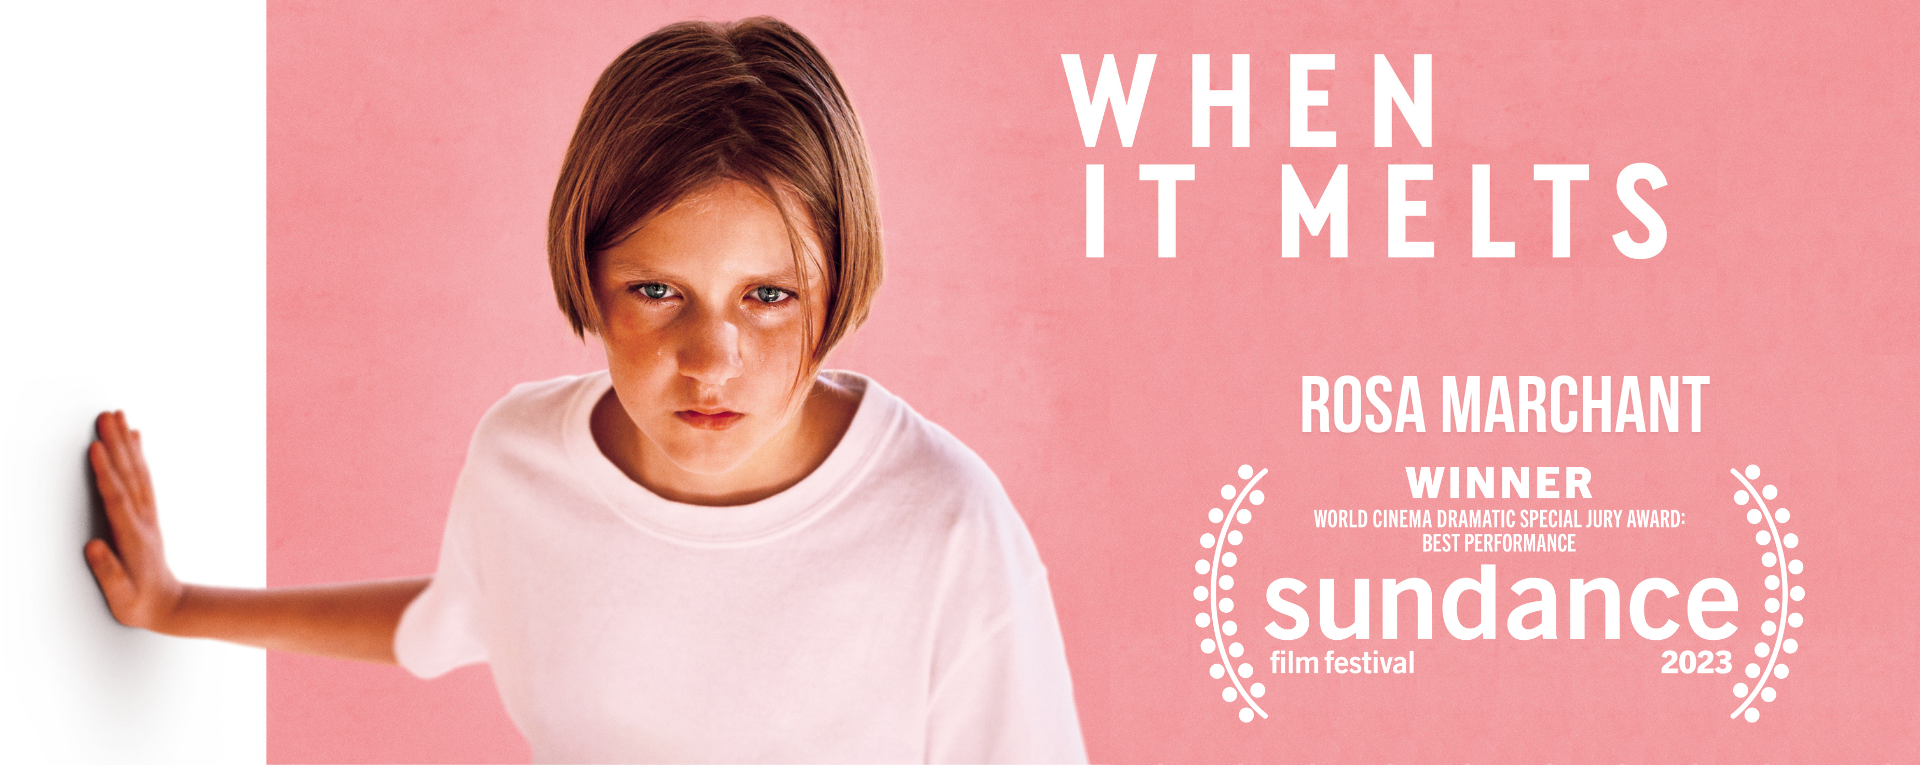 Rosa Marchant won BEST PERFORMANCE for WHEN IT MELTS at the 2023 Sundance Film Festival